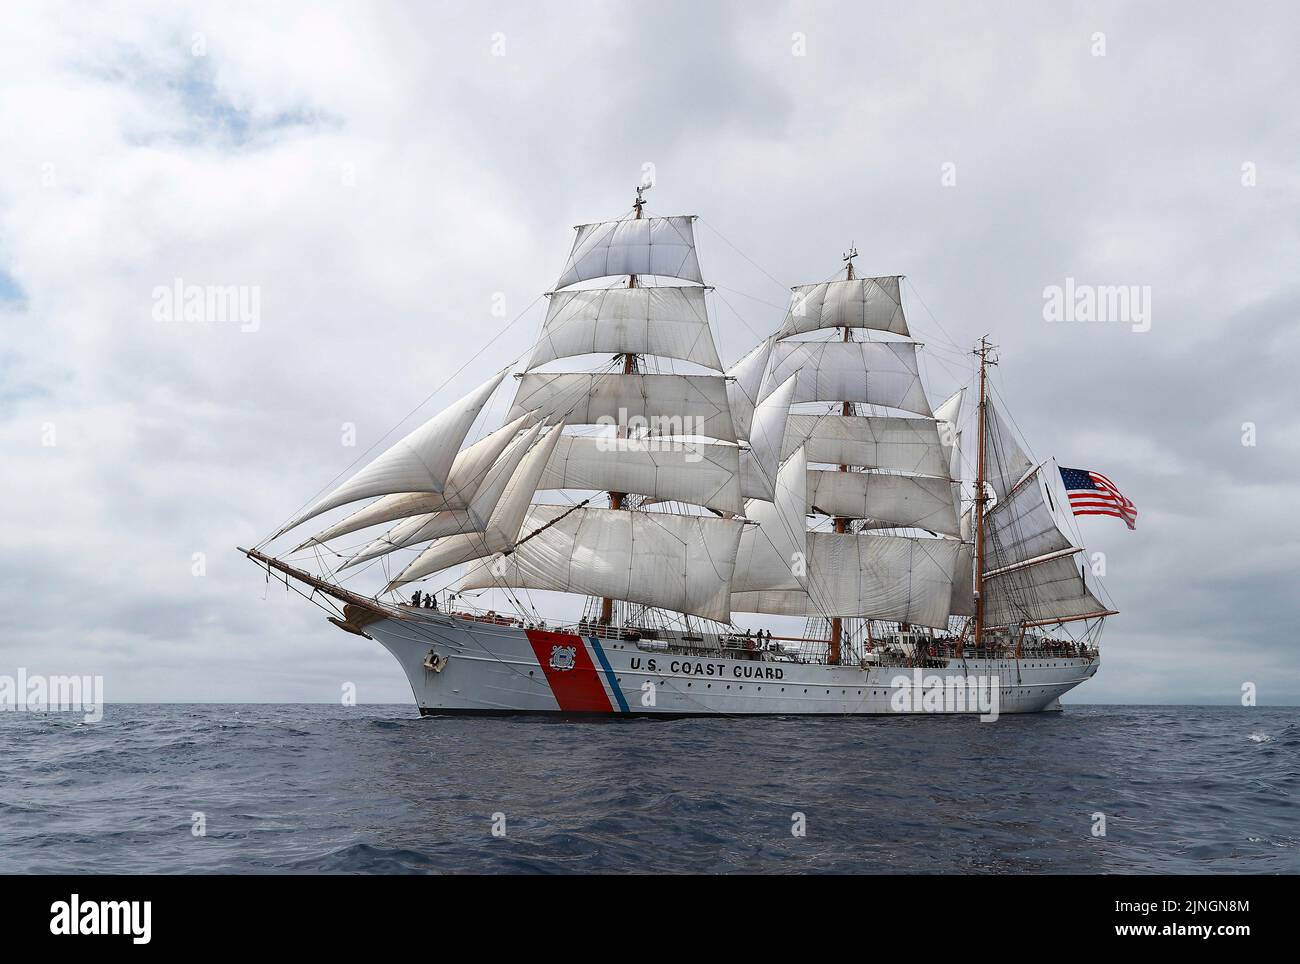 The U.S. Coast Guard cutter USCGC Eagle tall ship displaying full sails as it departs for the Atlantic Ocean, July 2, 2019 off the coast of the Azores. Stock Photo